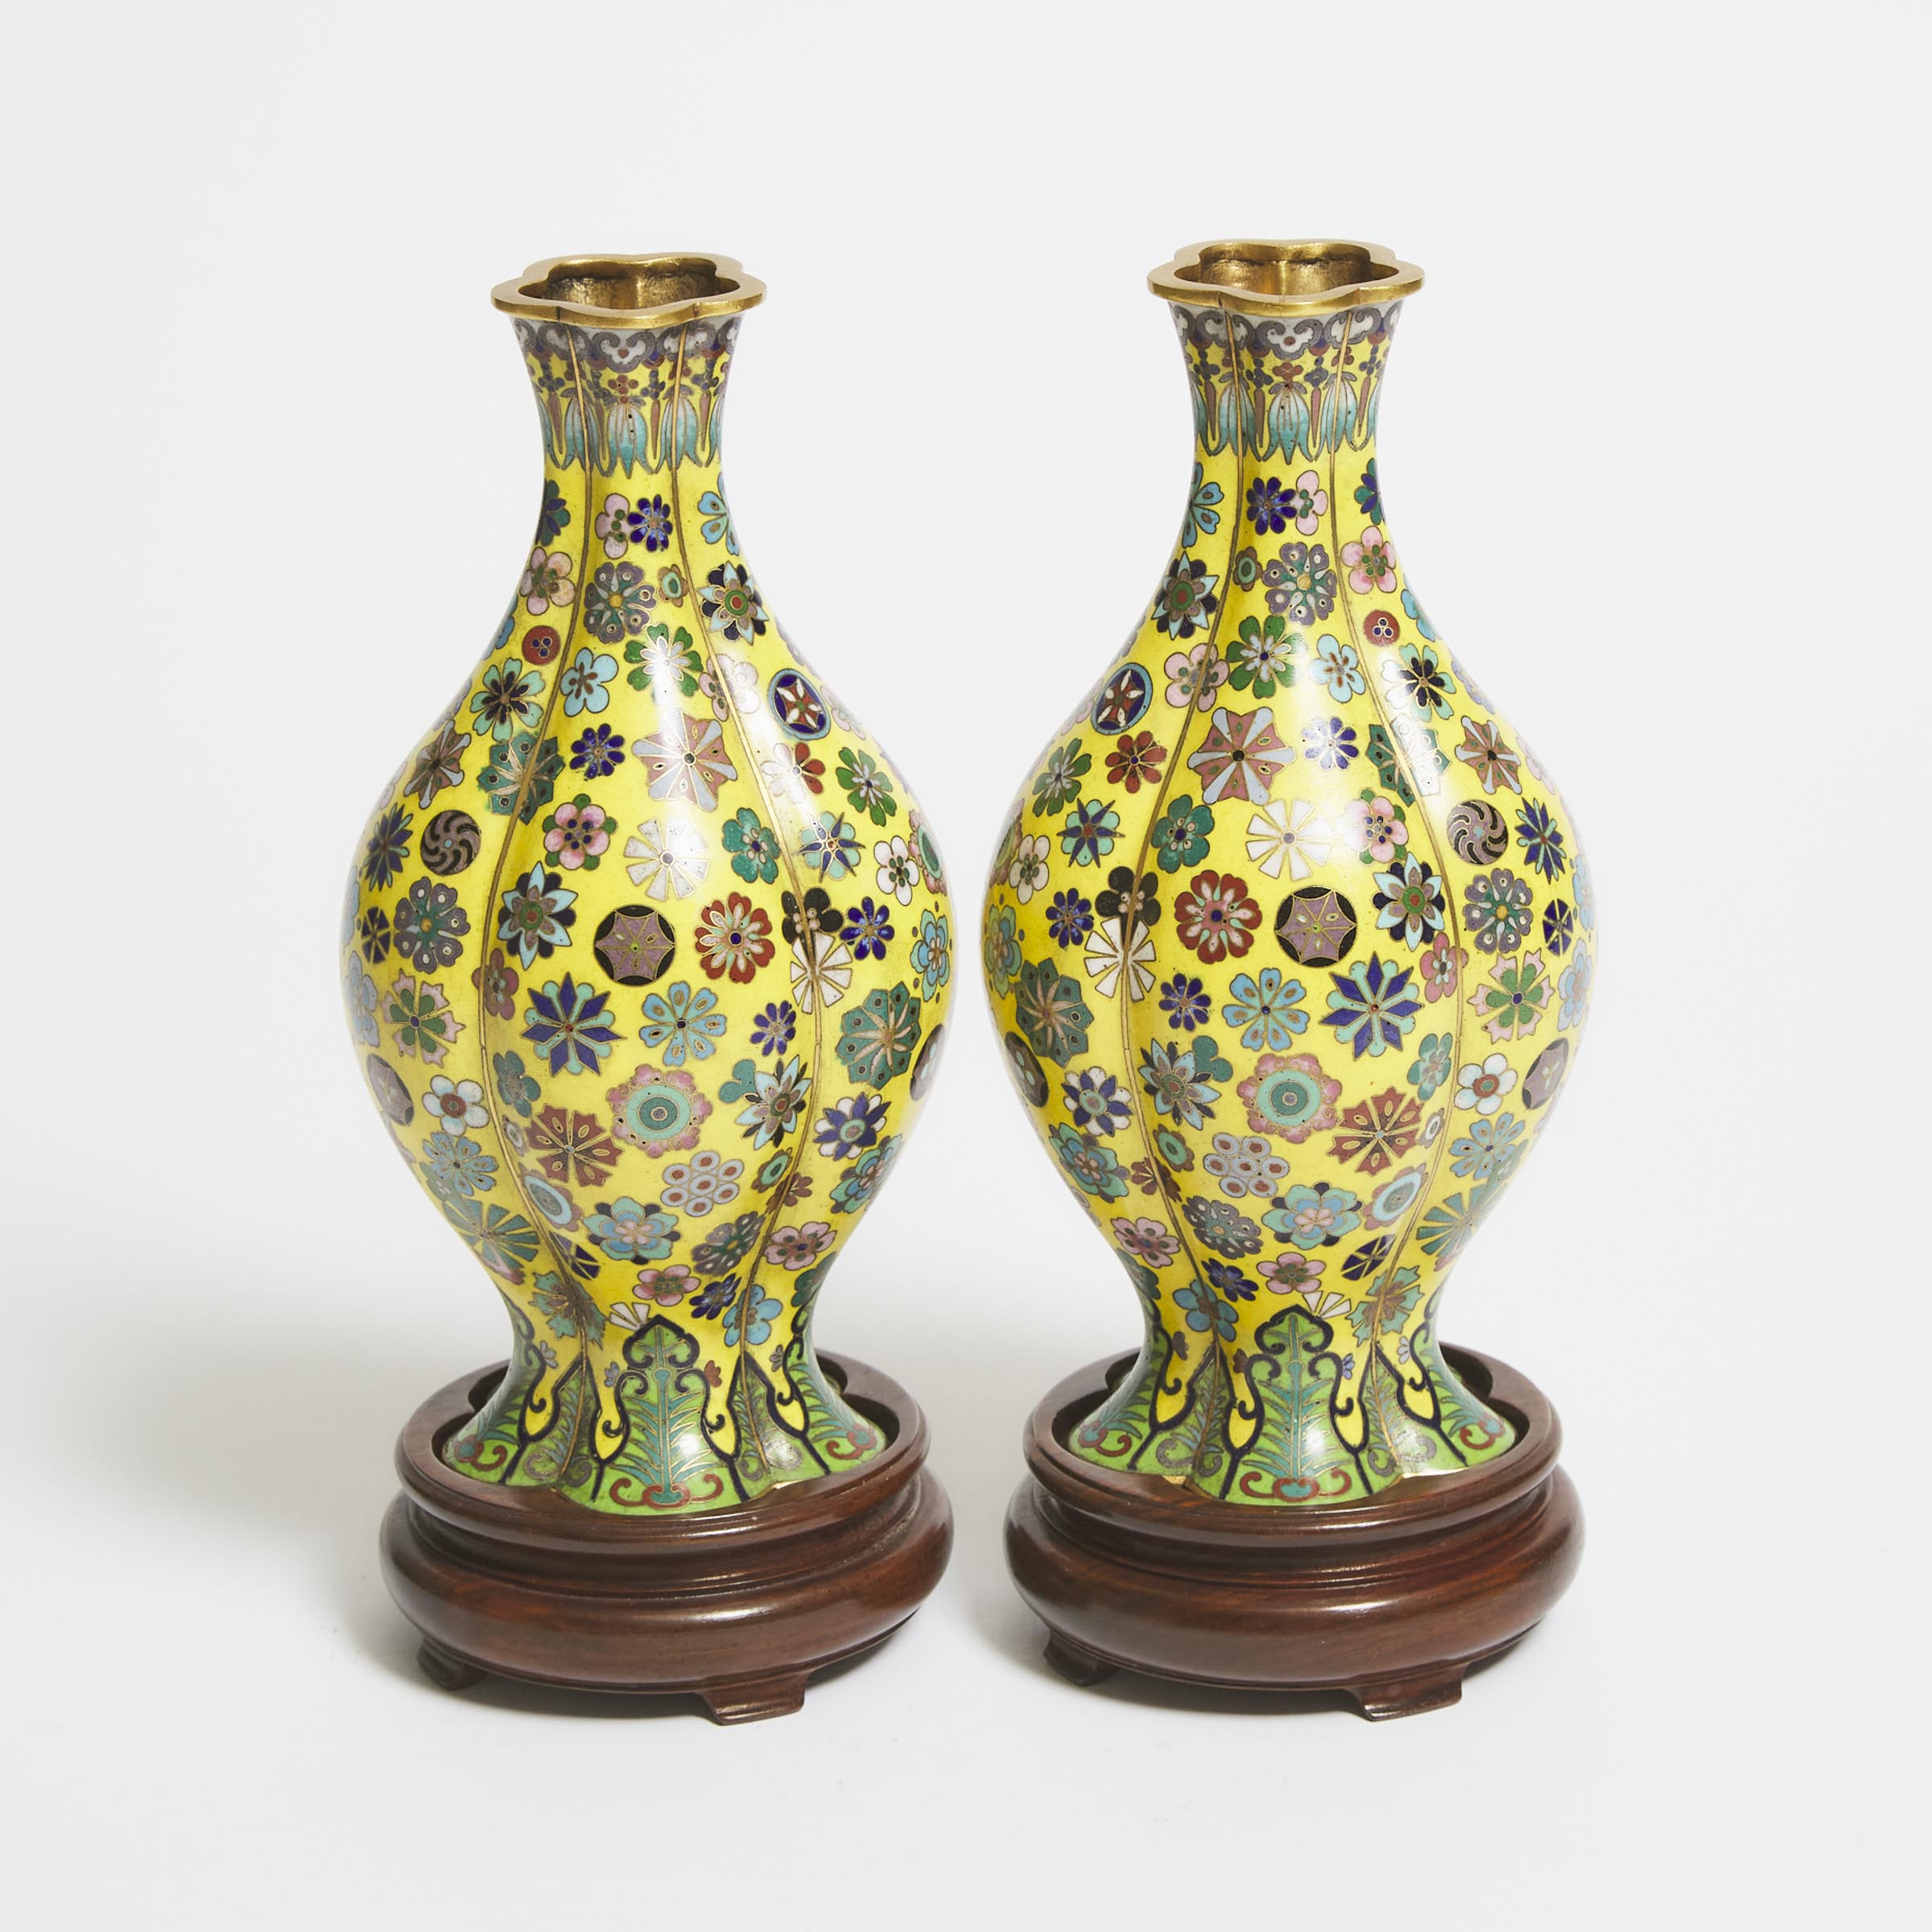 A Pair of Yellow-Ground Cloisonné